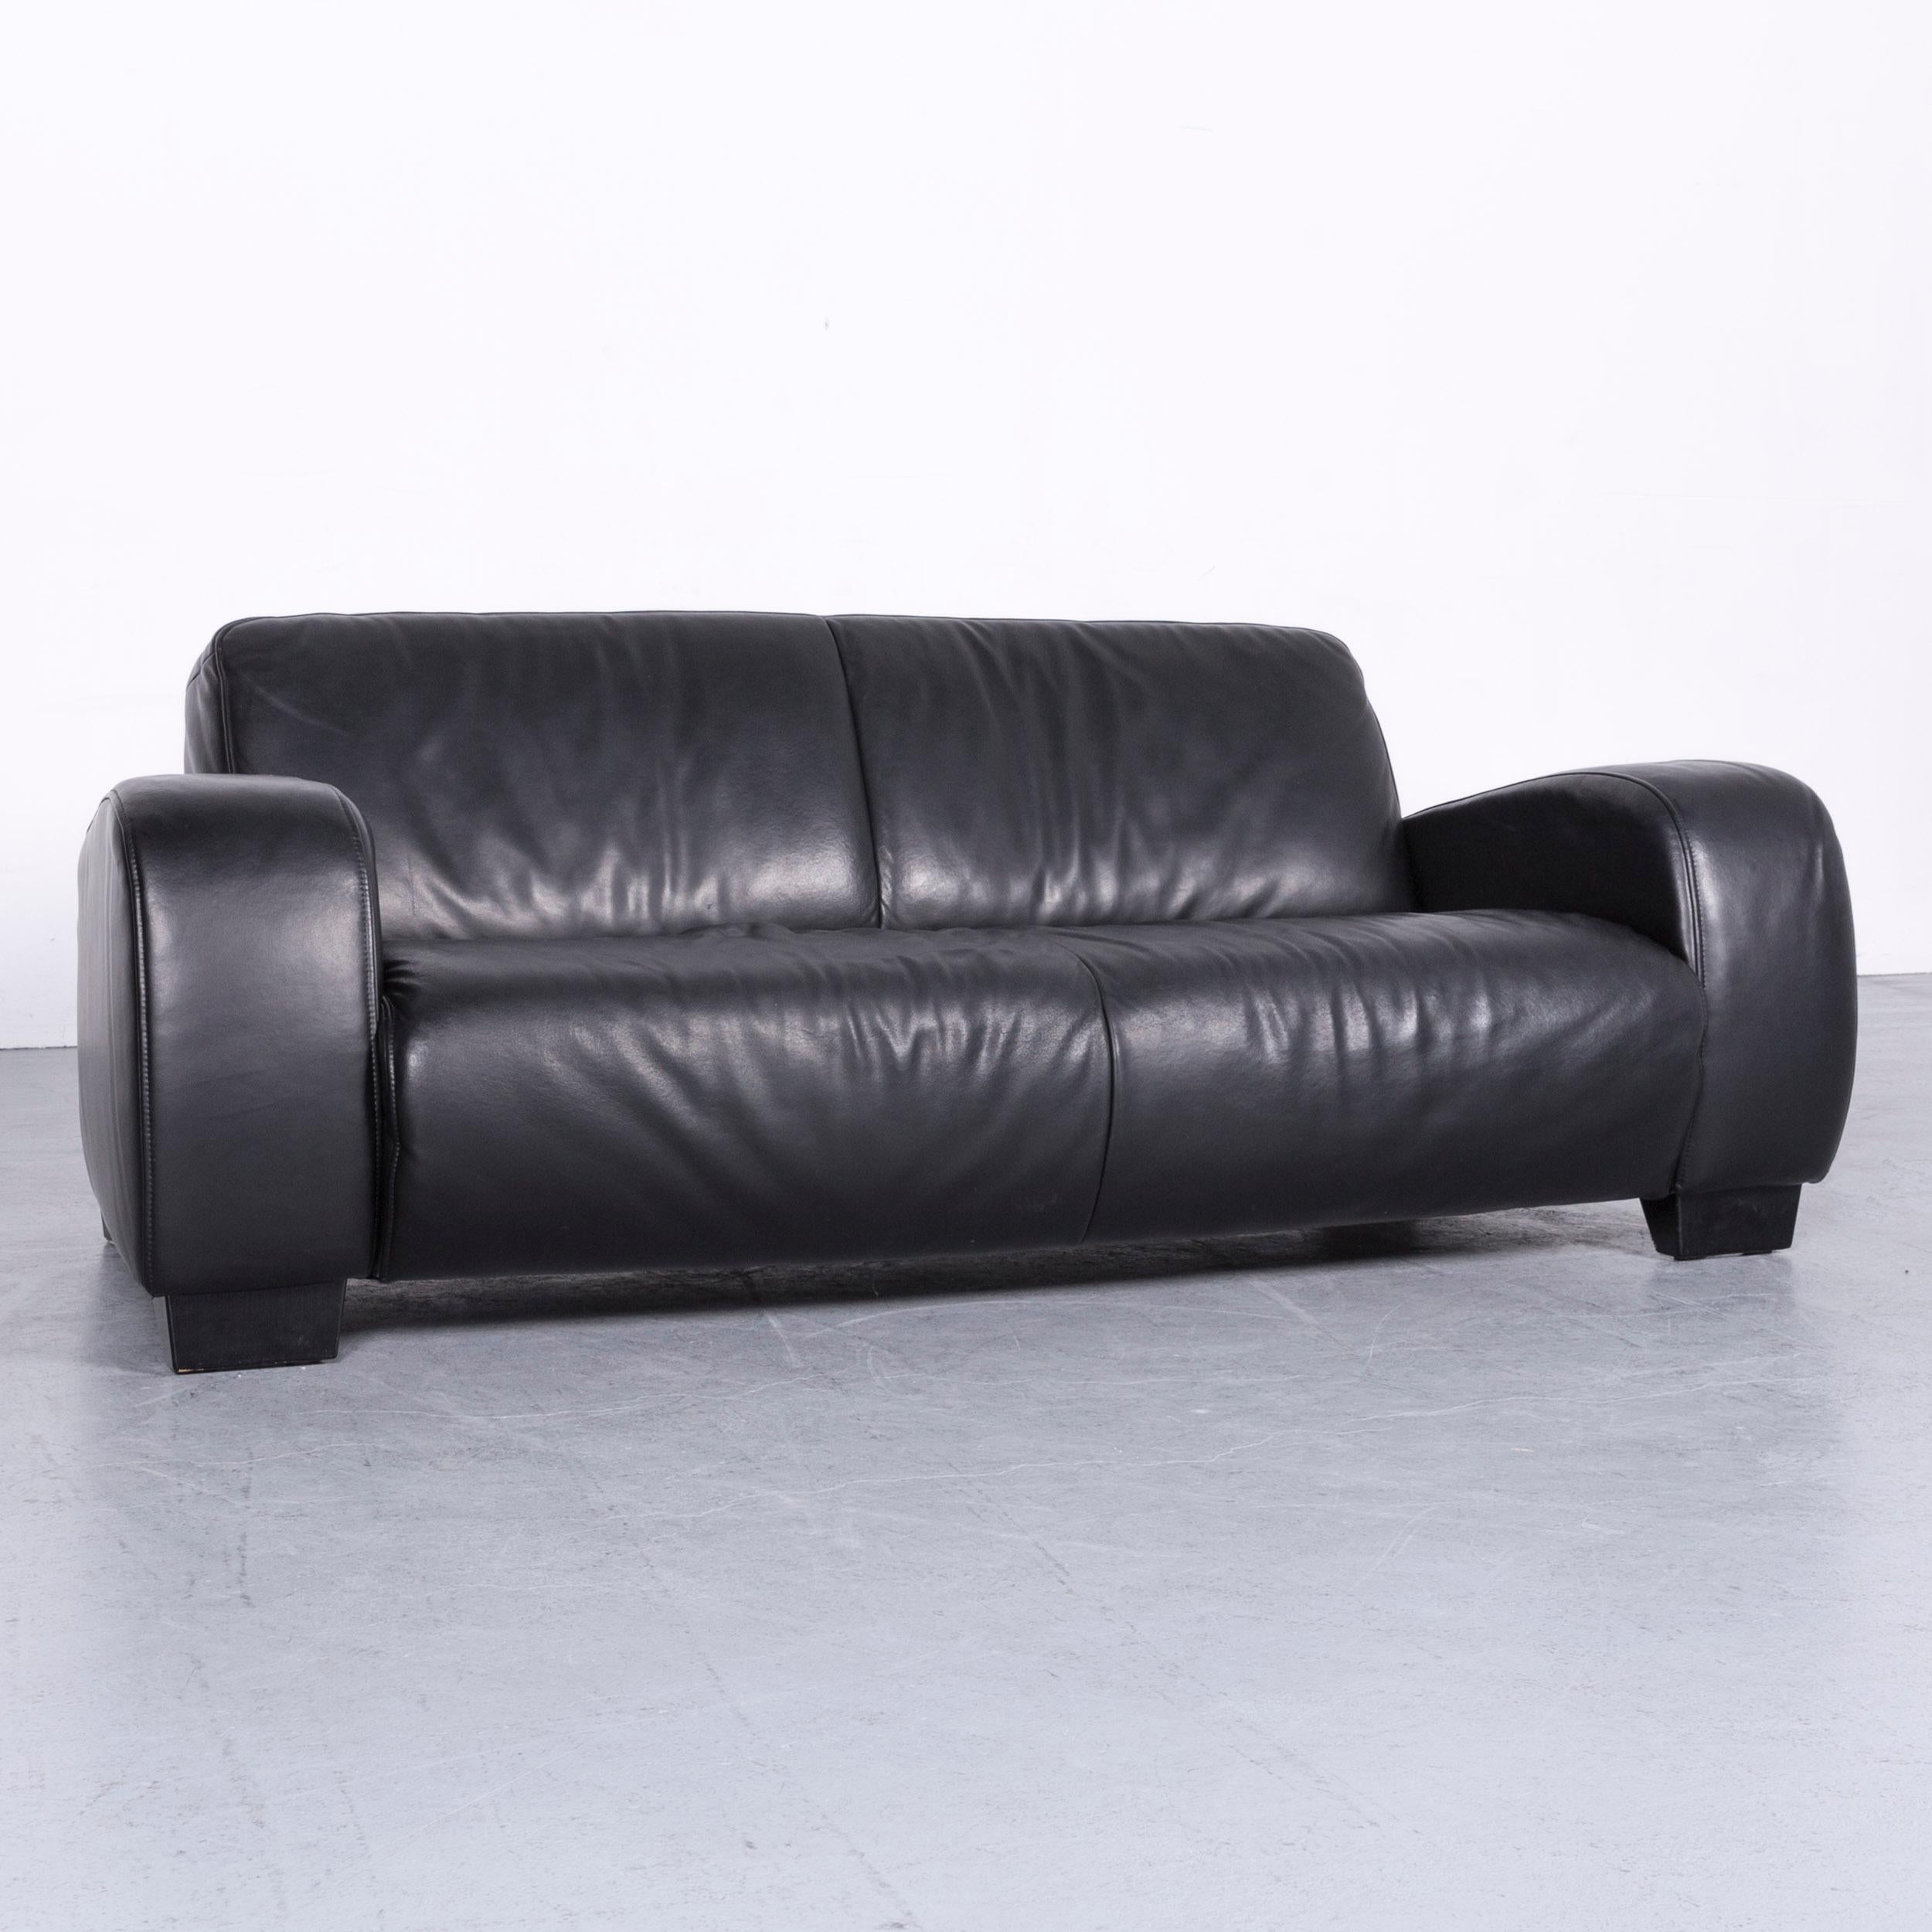 We bring to you a Koinor Rossini designer leather sofa black two-seat couch.